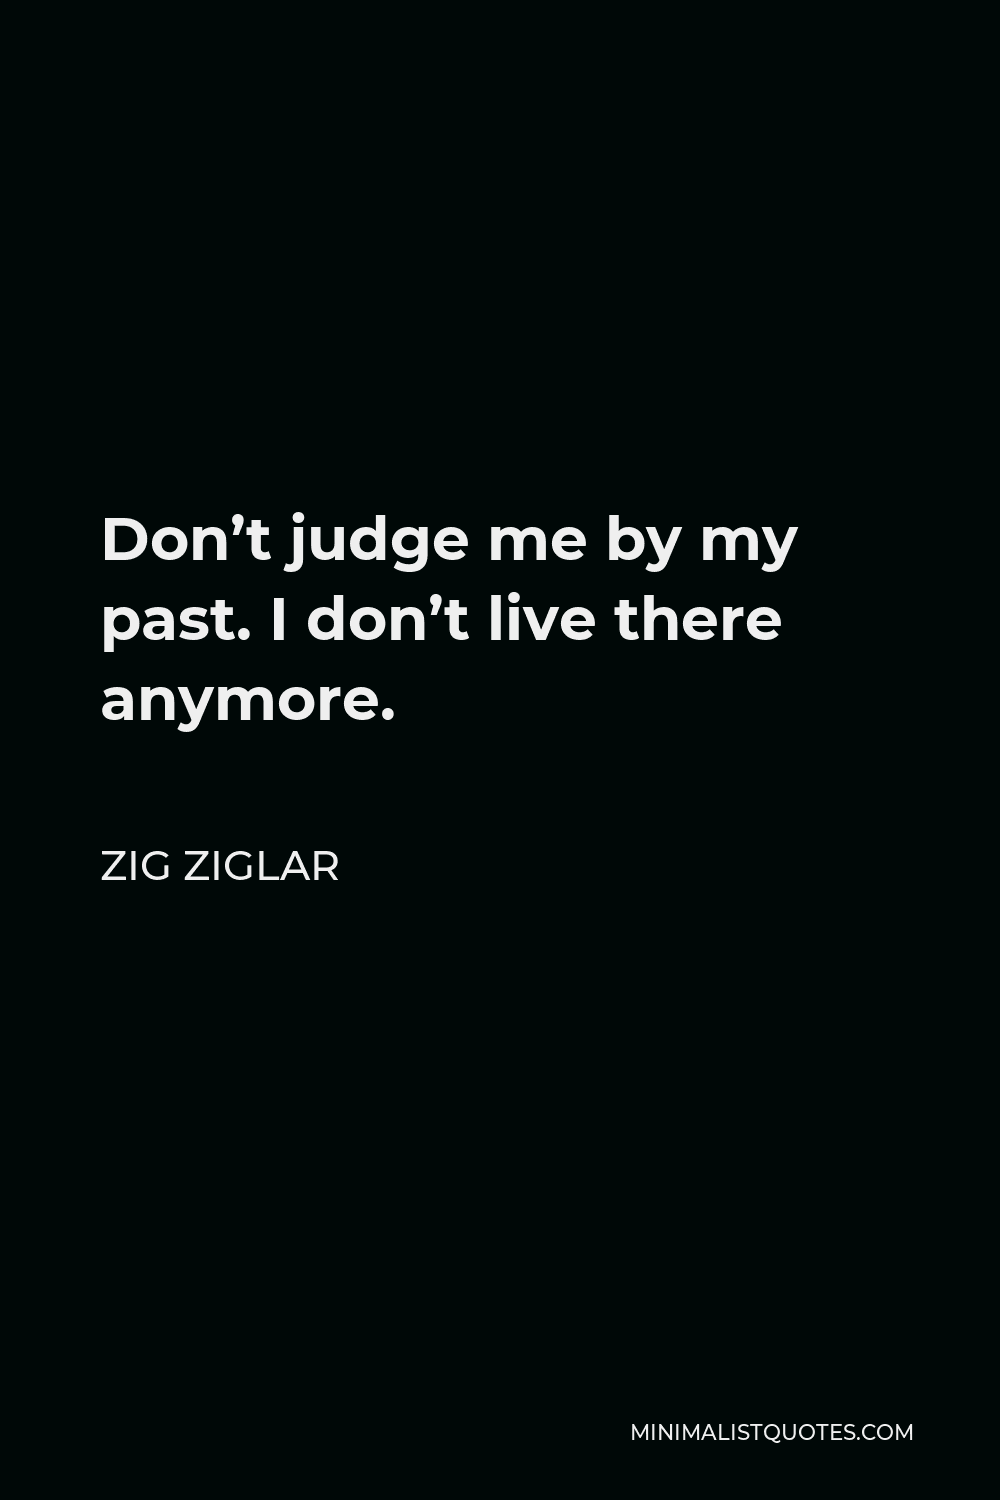 Zig Ziglar Quote: Don't judge me by my past. I don't live there anymore